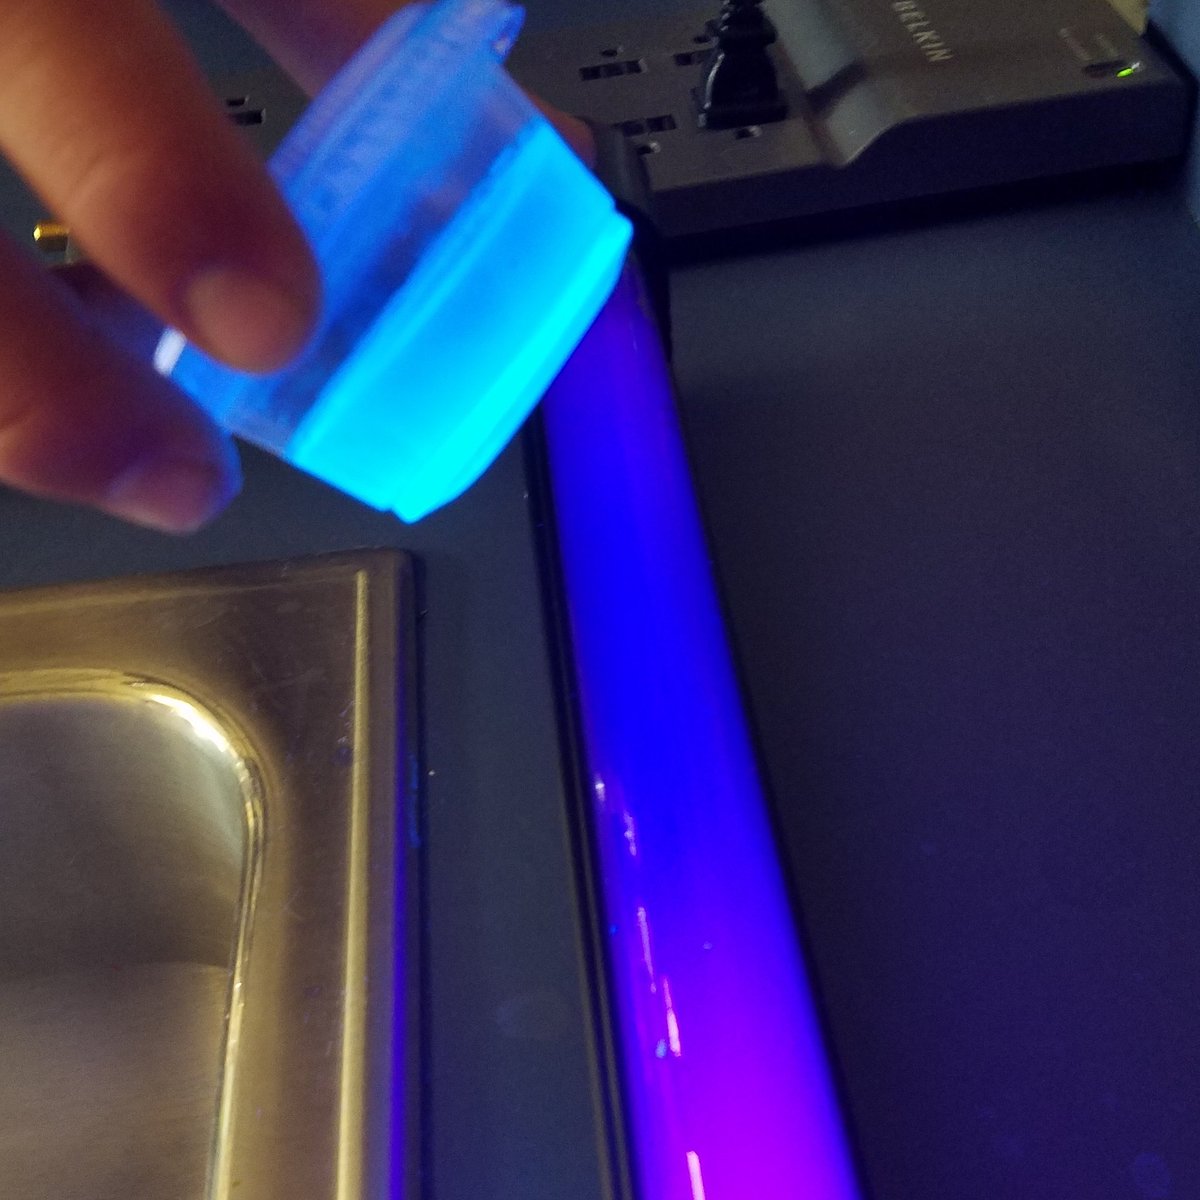 Made glow-in-the-dark Jello to review states if matter #ssdchat #sciencerocks #cangss